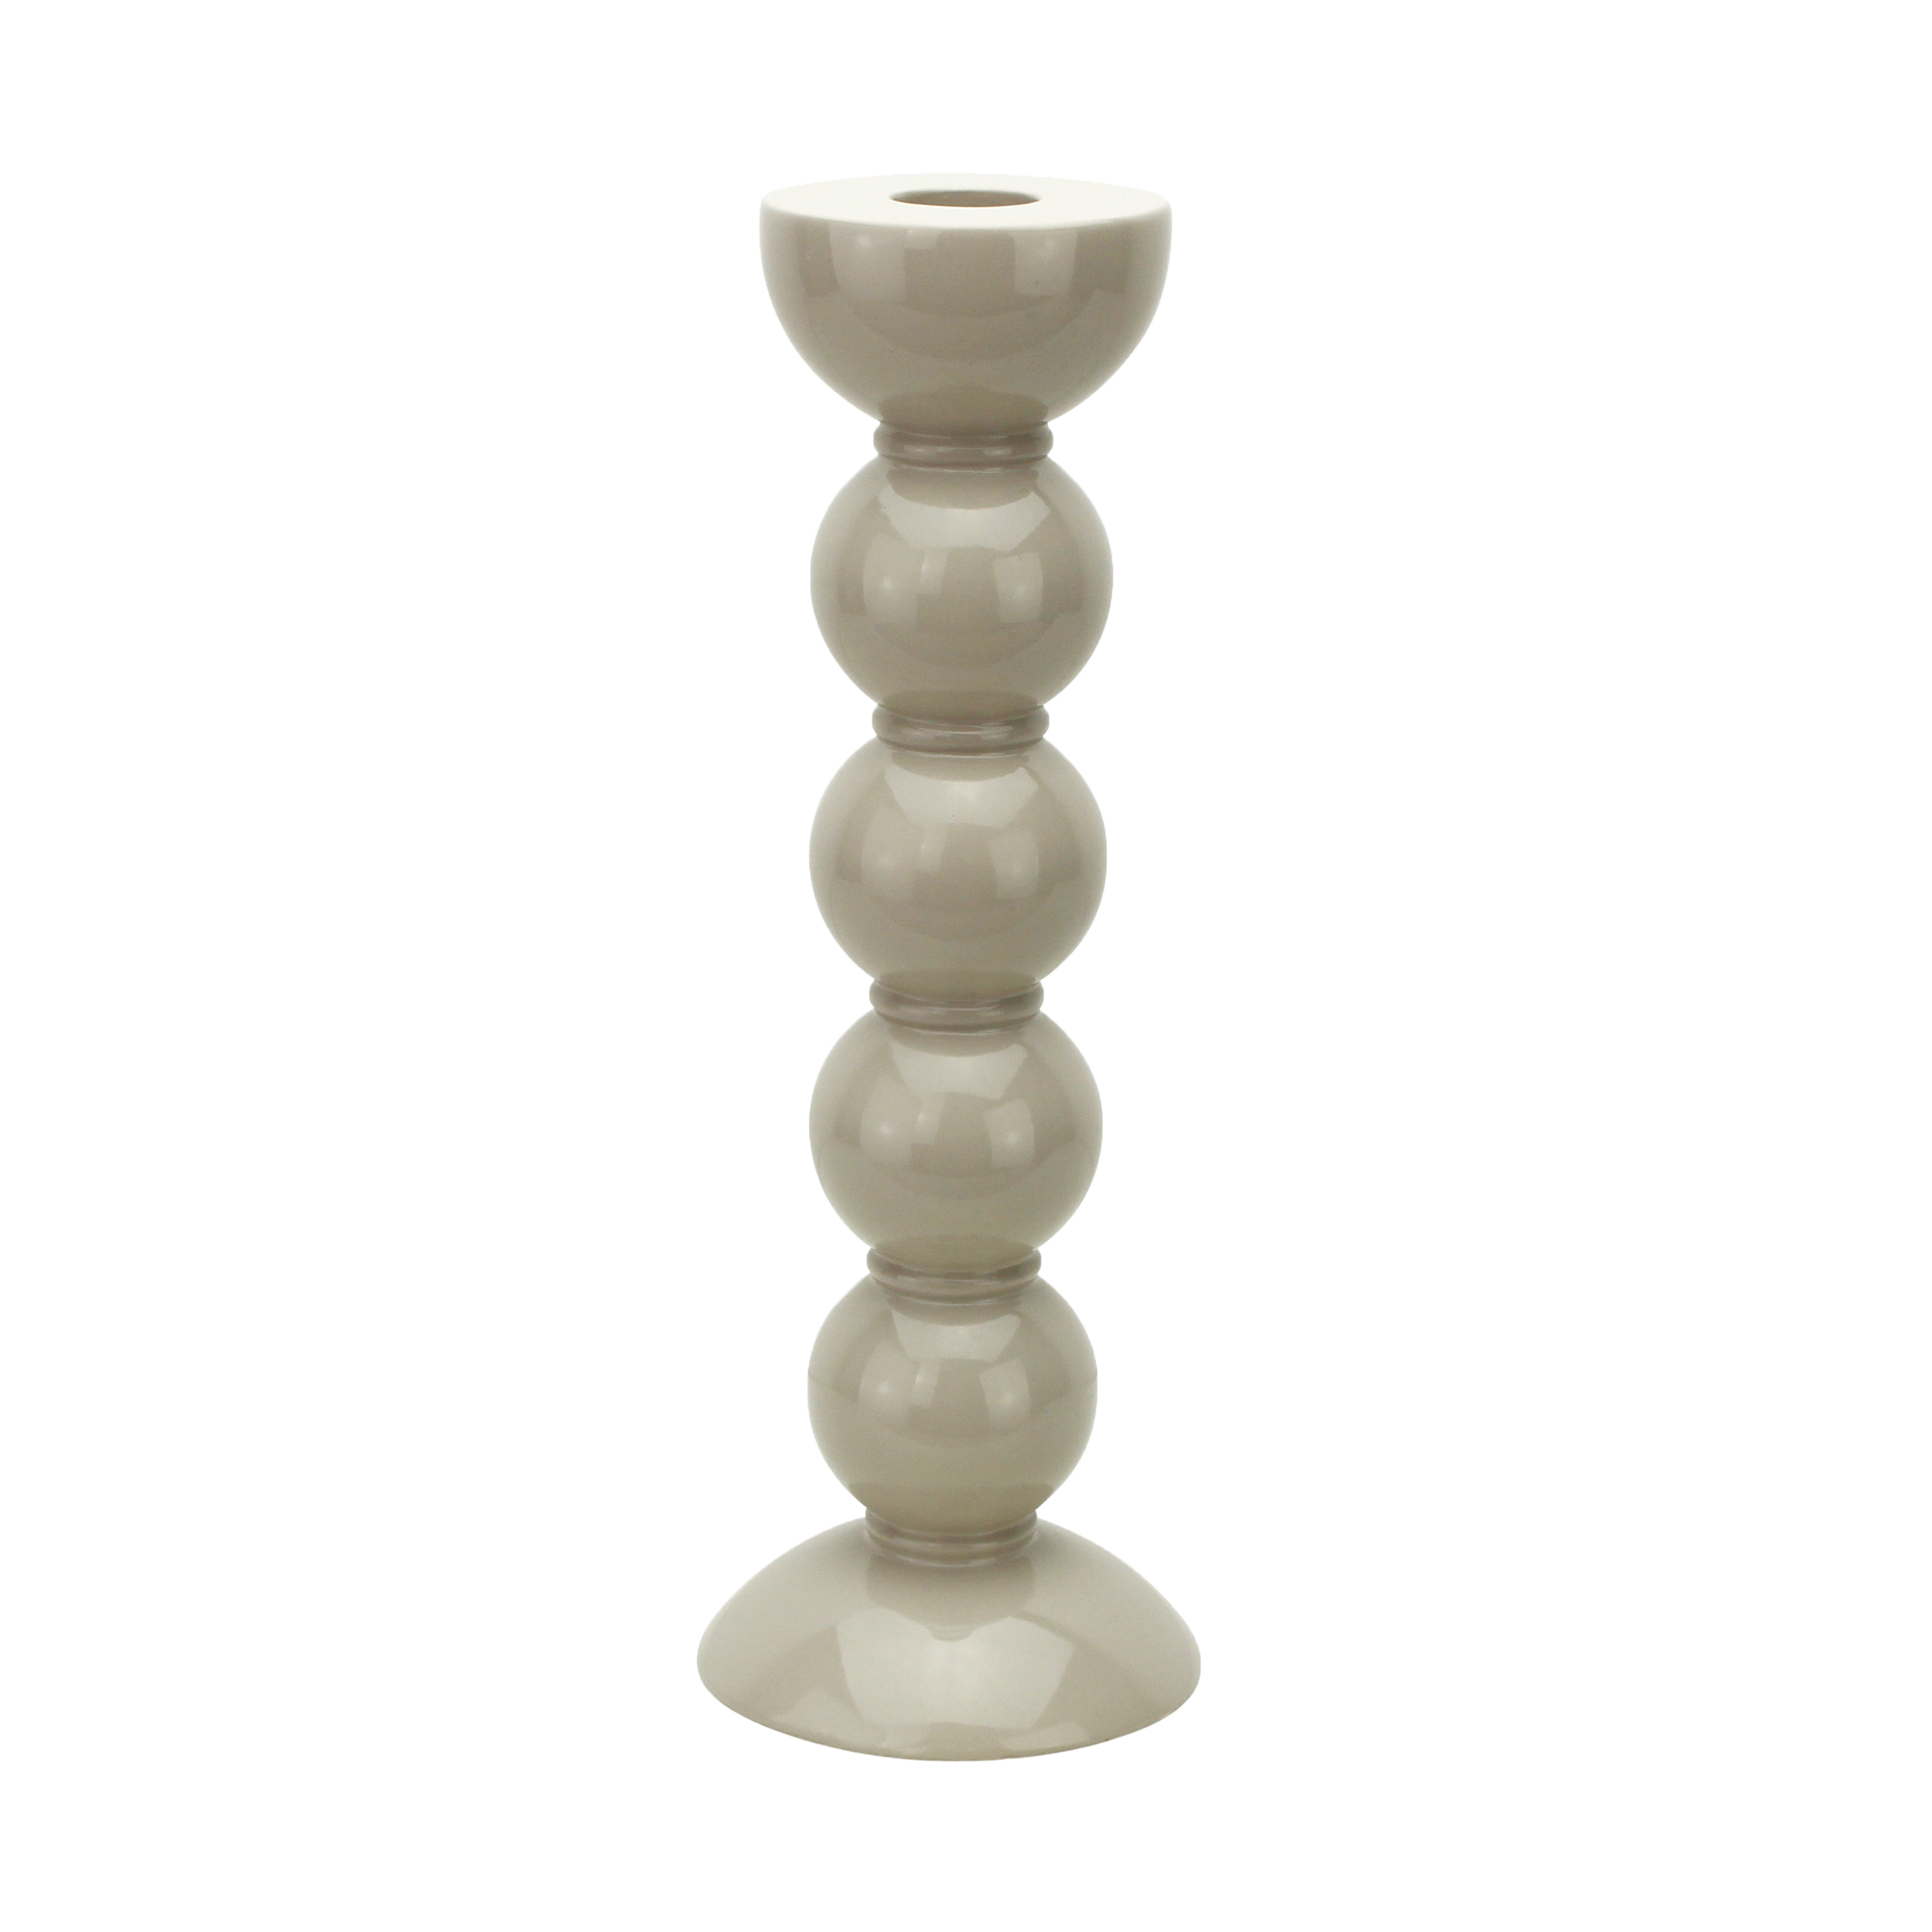 Tall bobbin candle holder in cappuccino